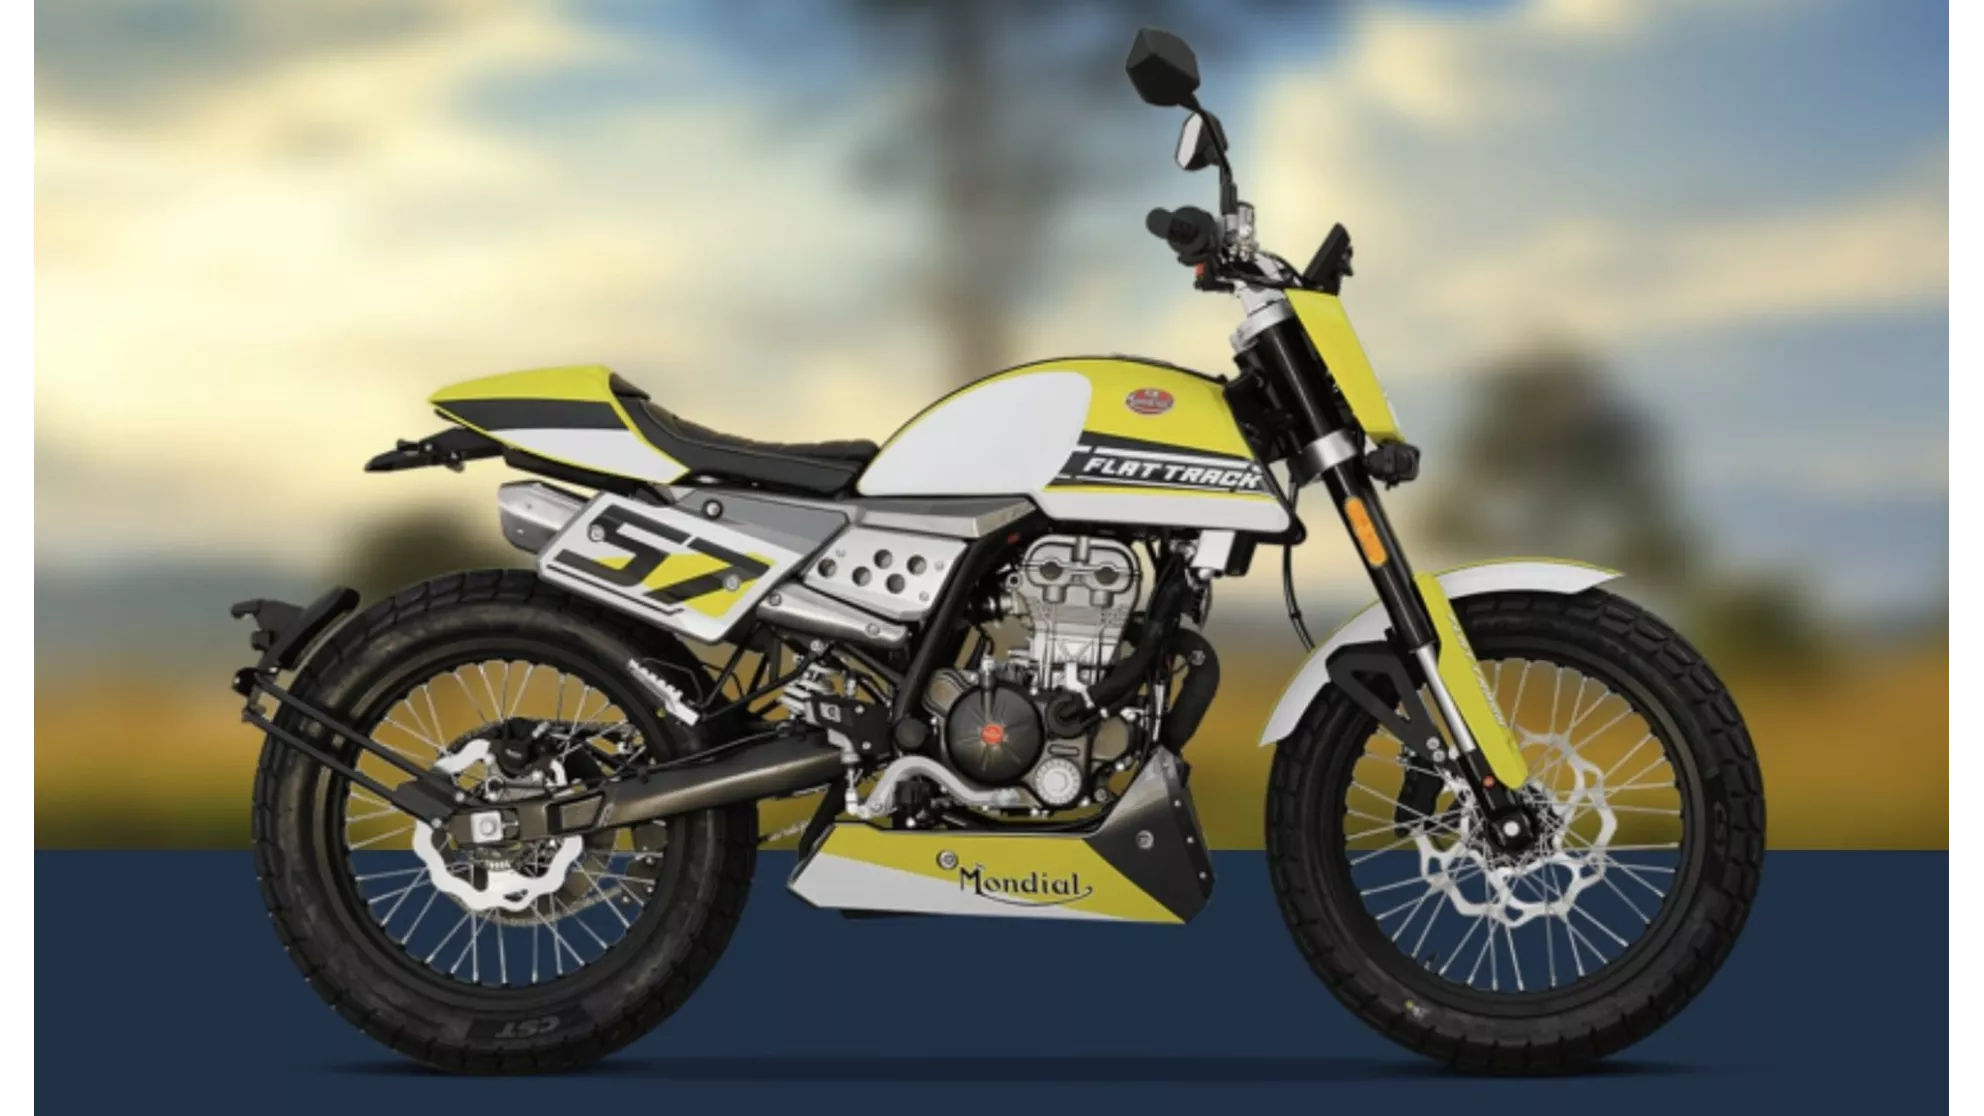 FB Mondial Flat Track 125i ABS - afbeelding 1